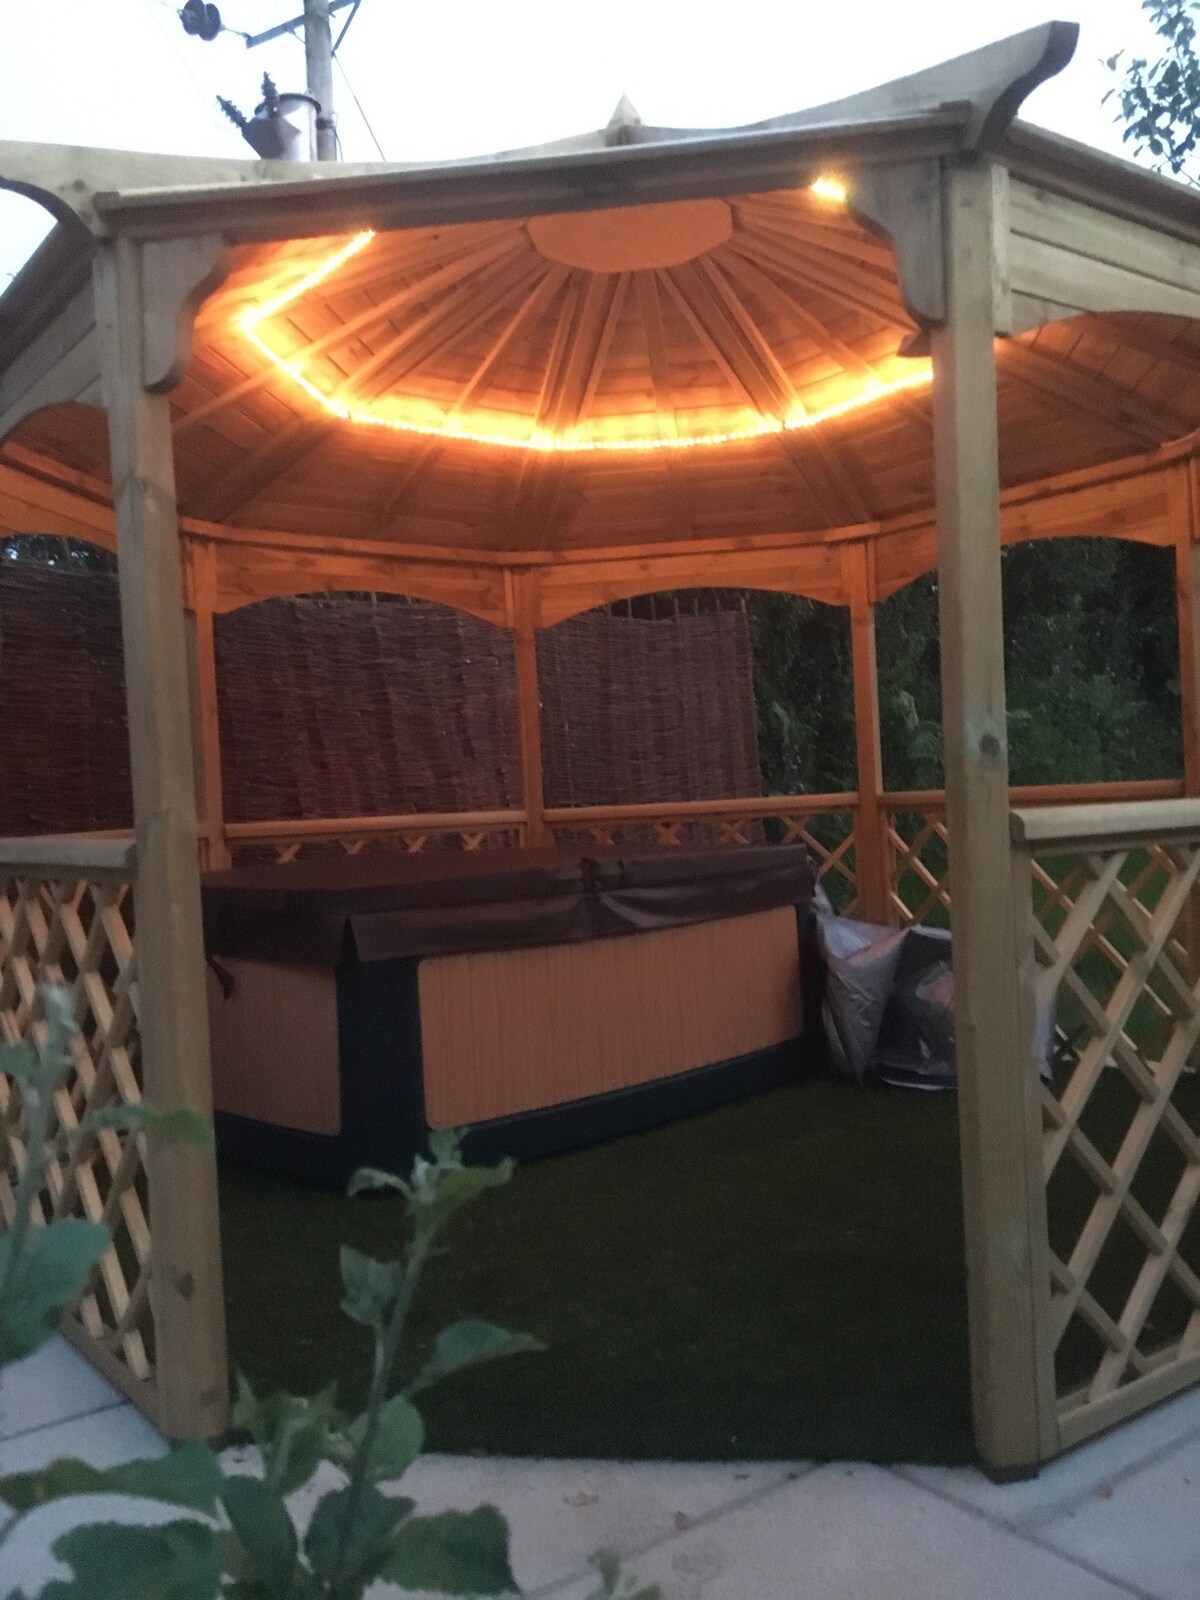 The Orchard Glamping pod